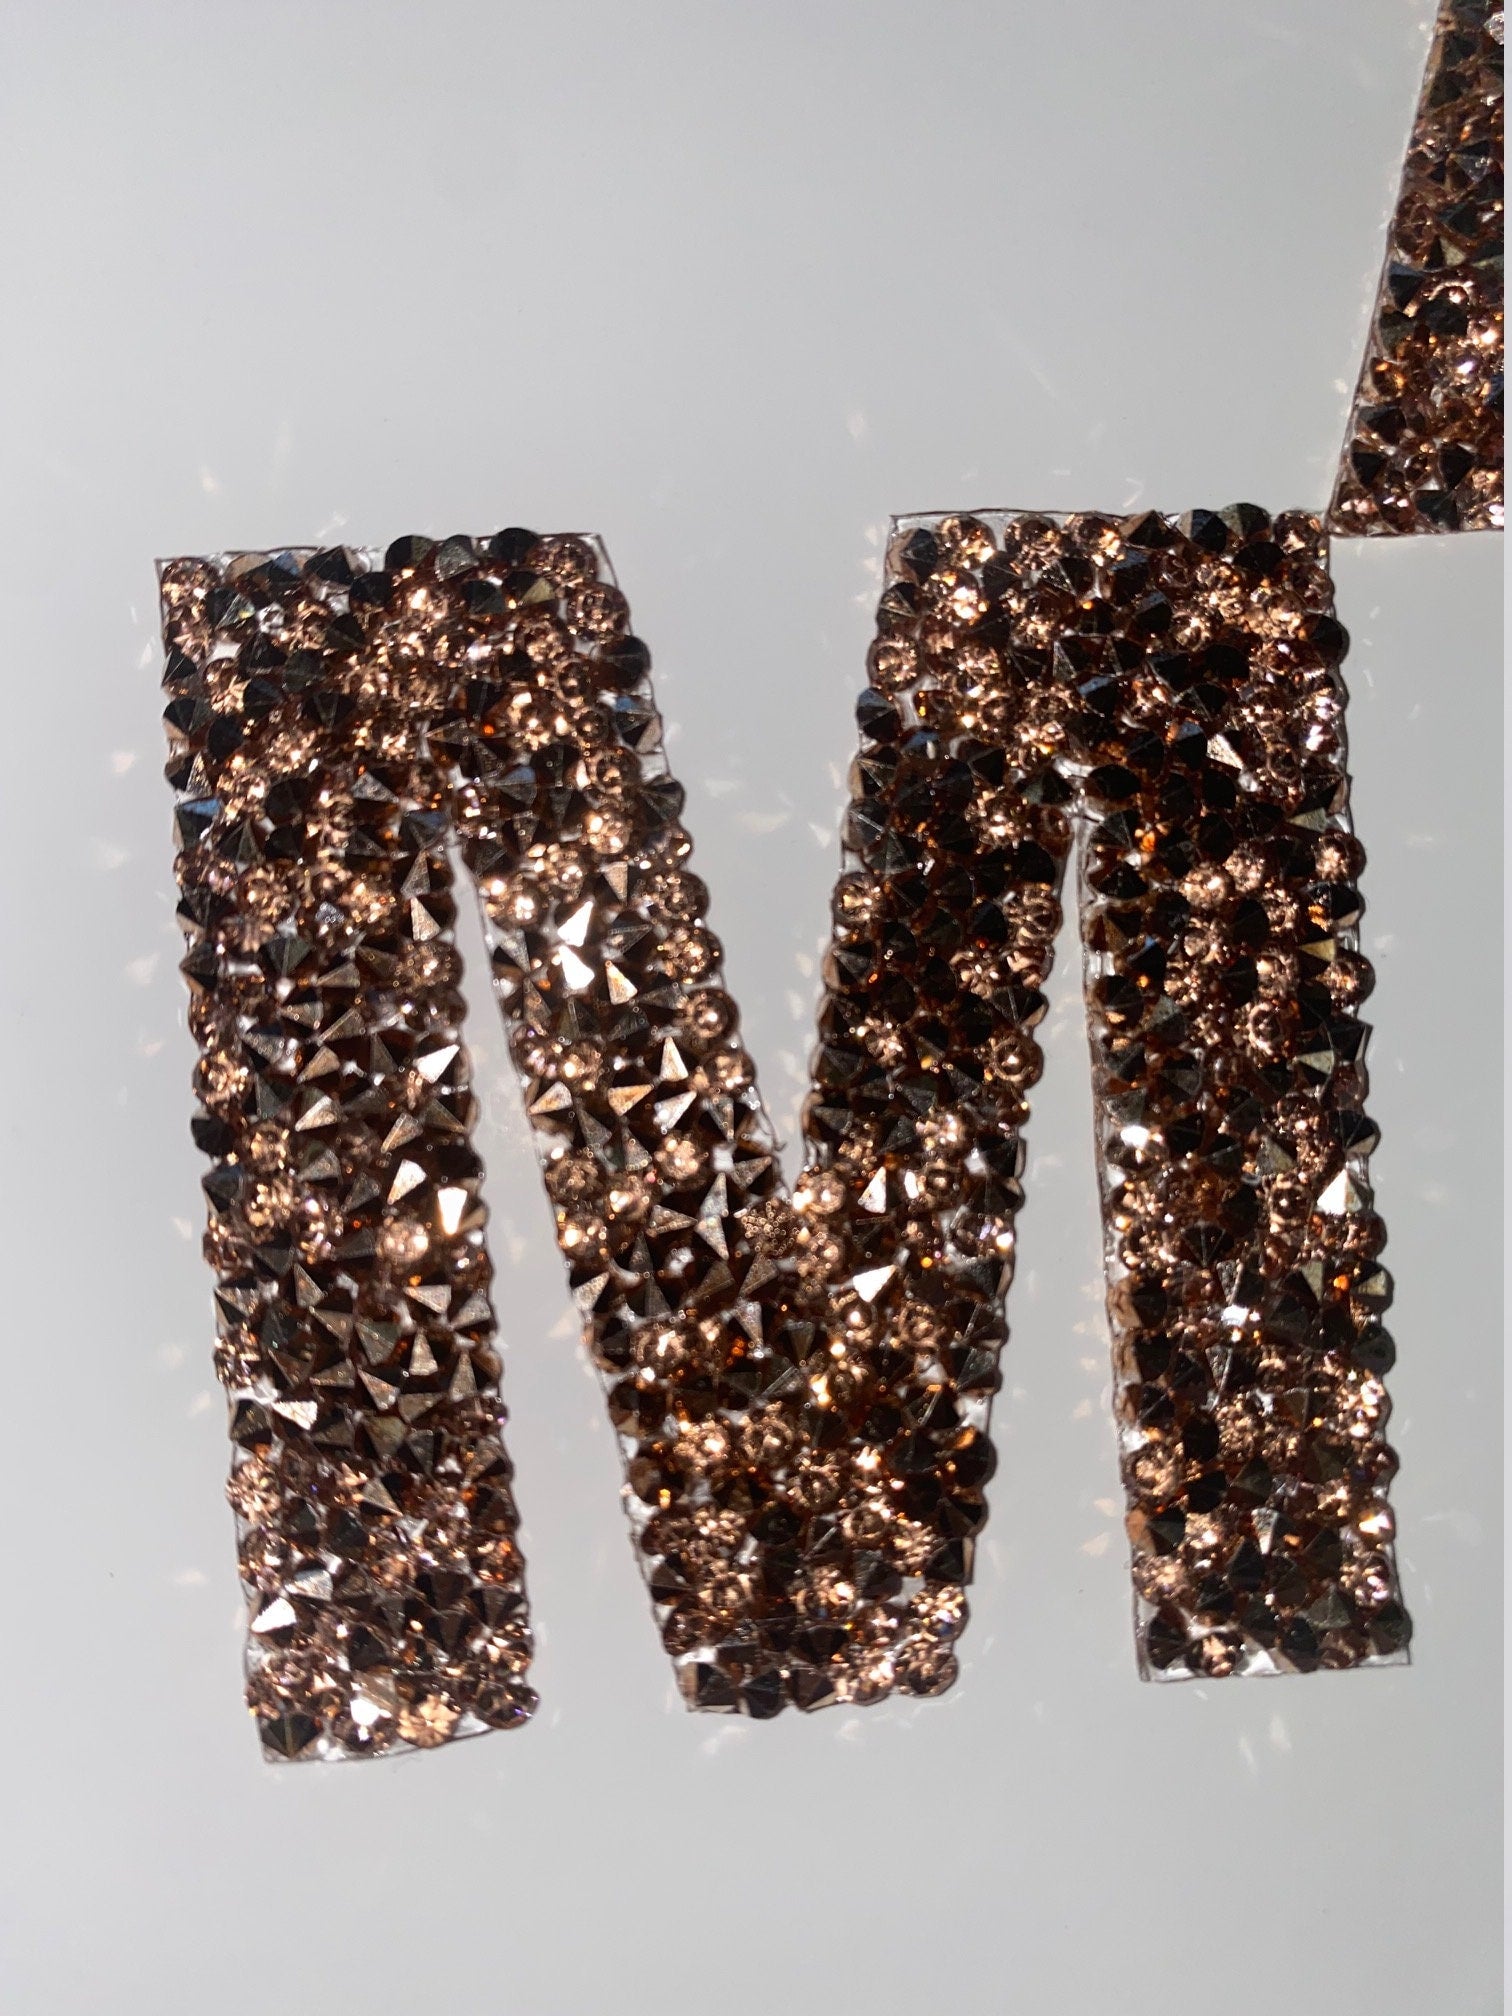 Hotfix Rhinestone Letters, ROSE GOLD(1 pc), NEW, Choose Your Letter, Rhinestone Patch with Adhesive, Mesh Bling Letters, Size 2.28"